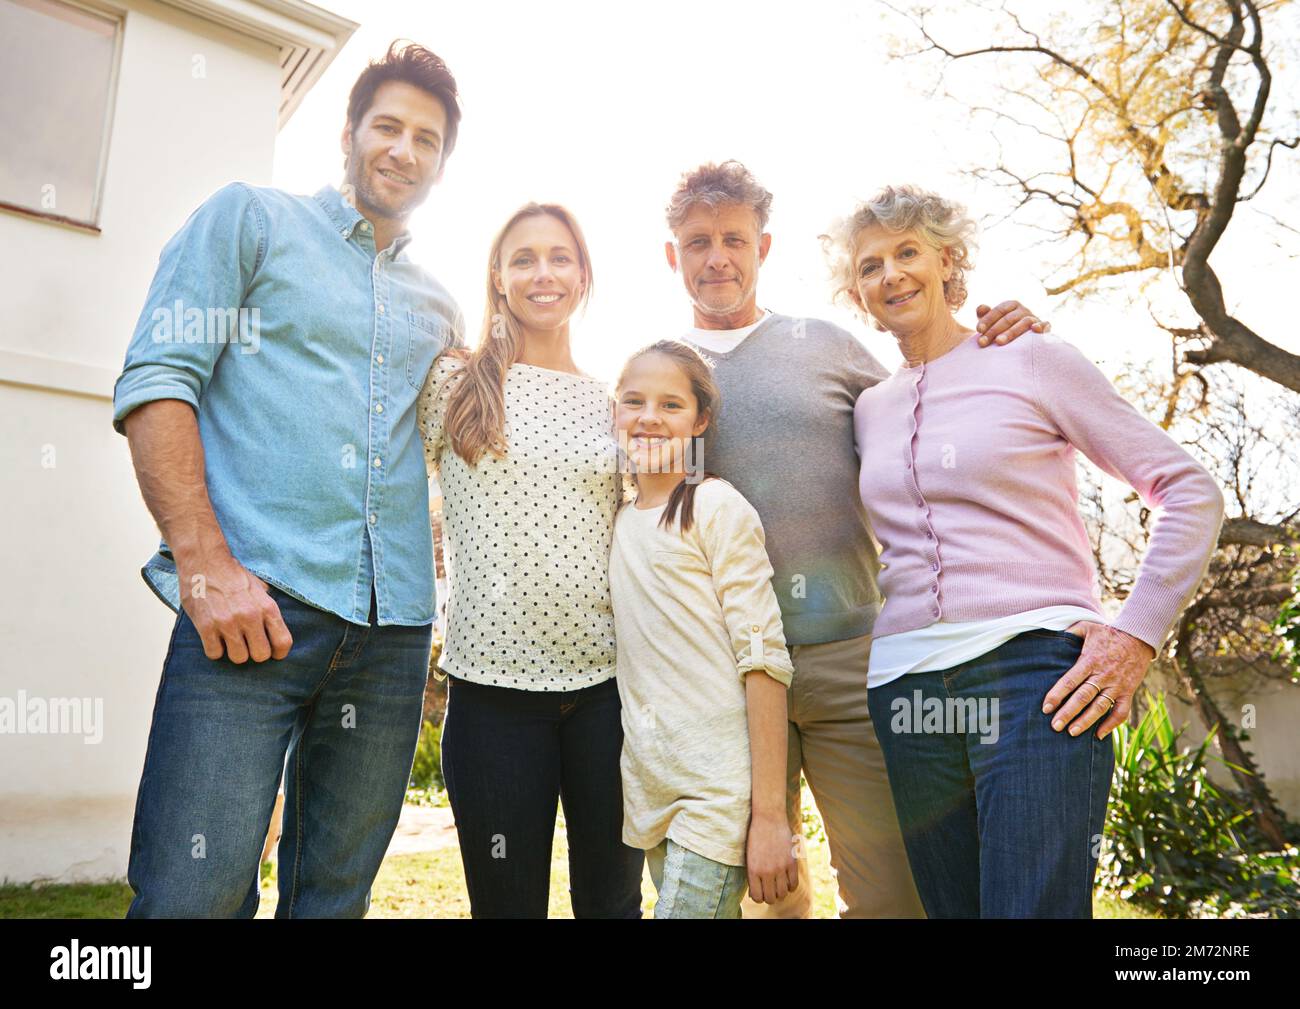 Happiness is real when shared. A portrait of a happy multi-generation family standing outdoors. Stock Photo